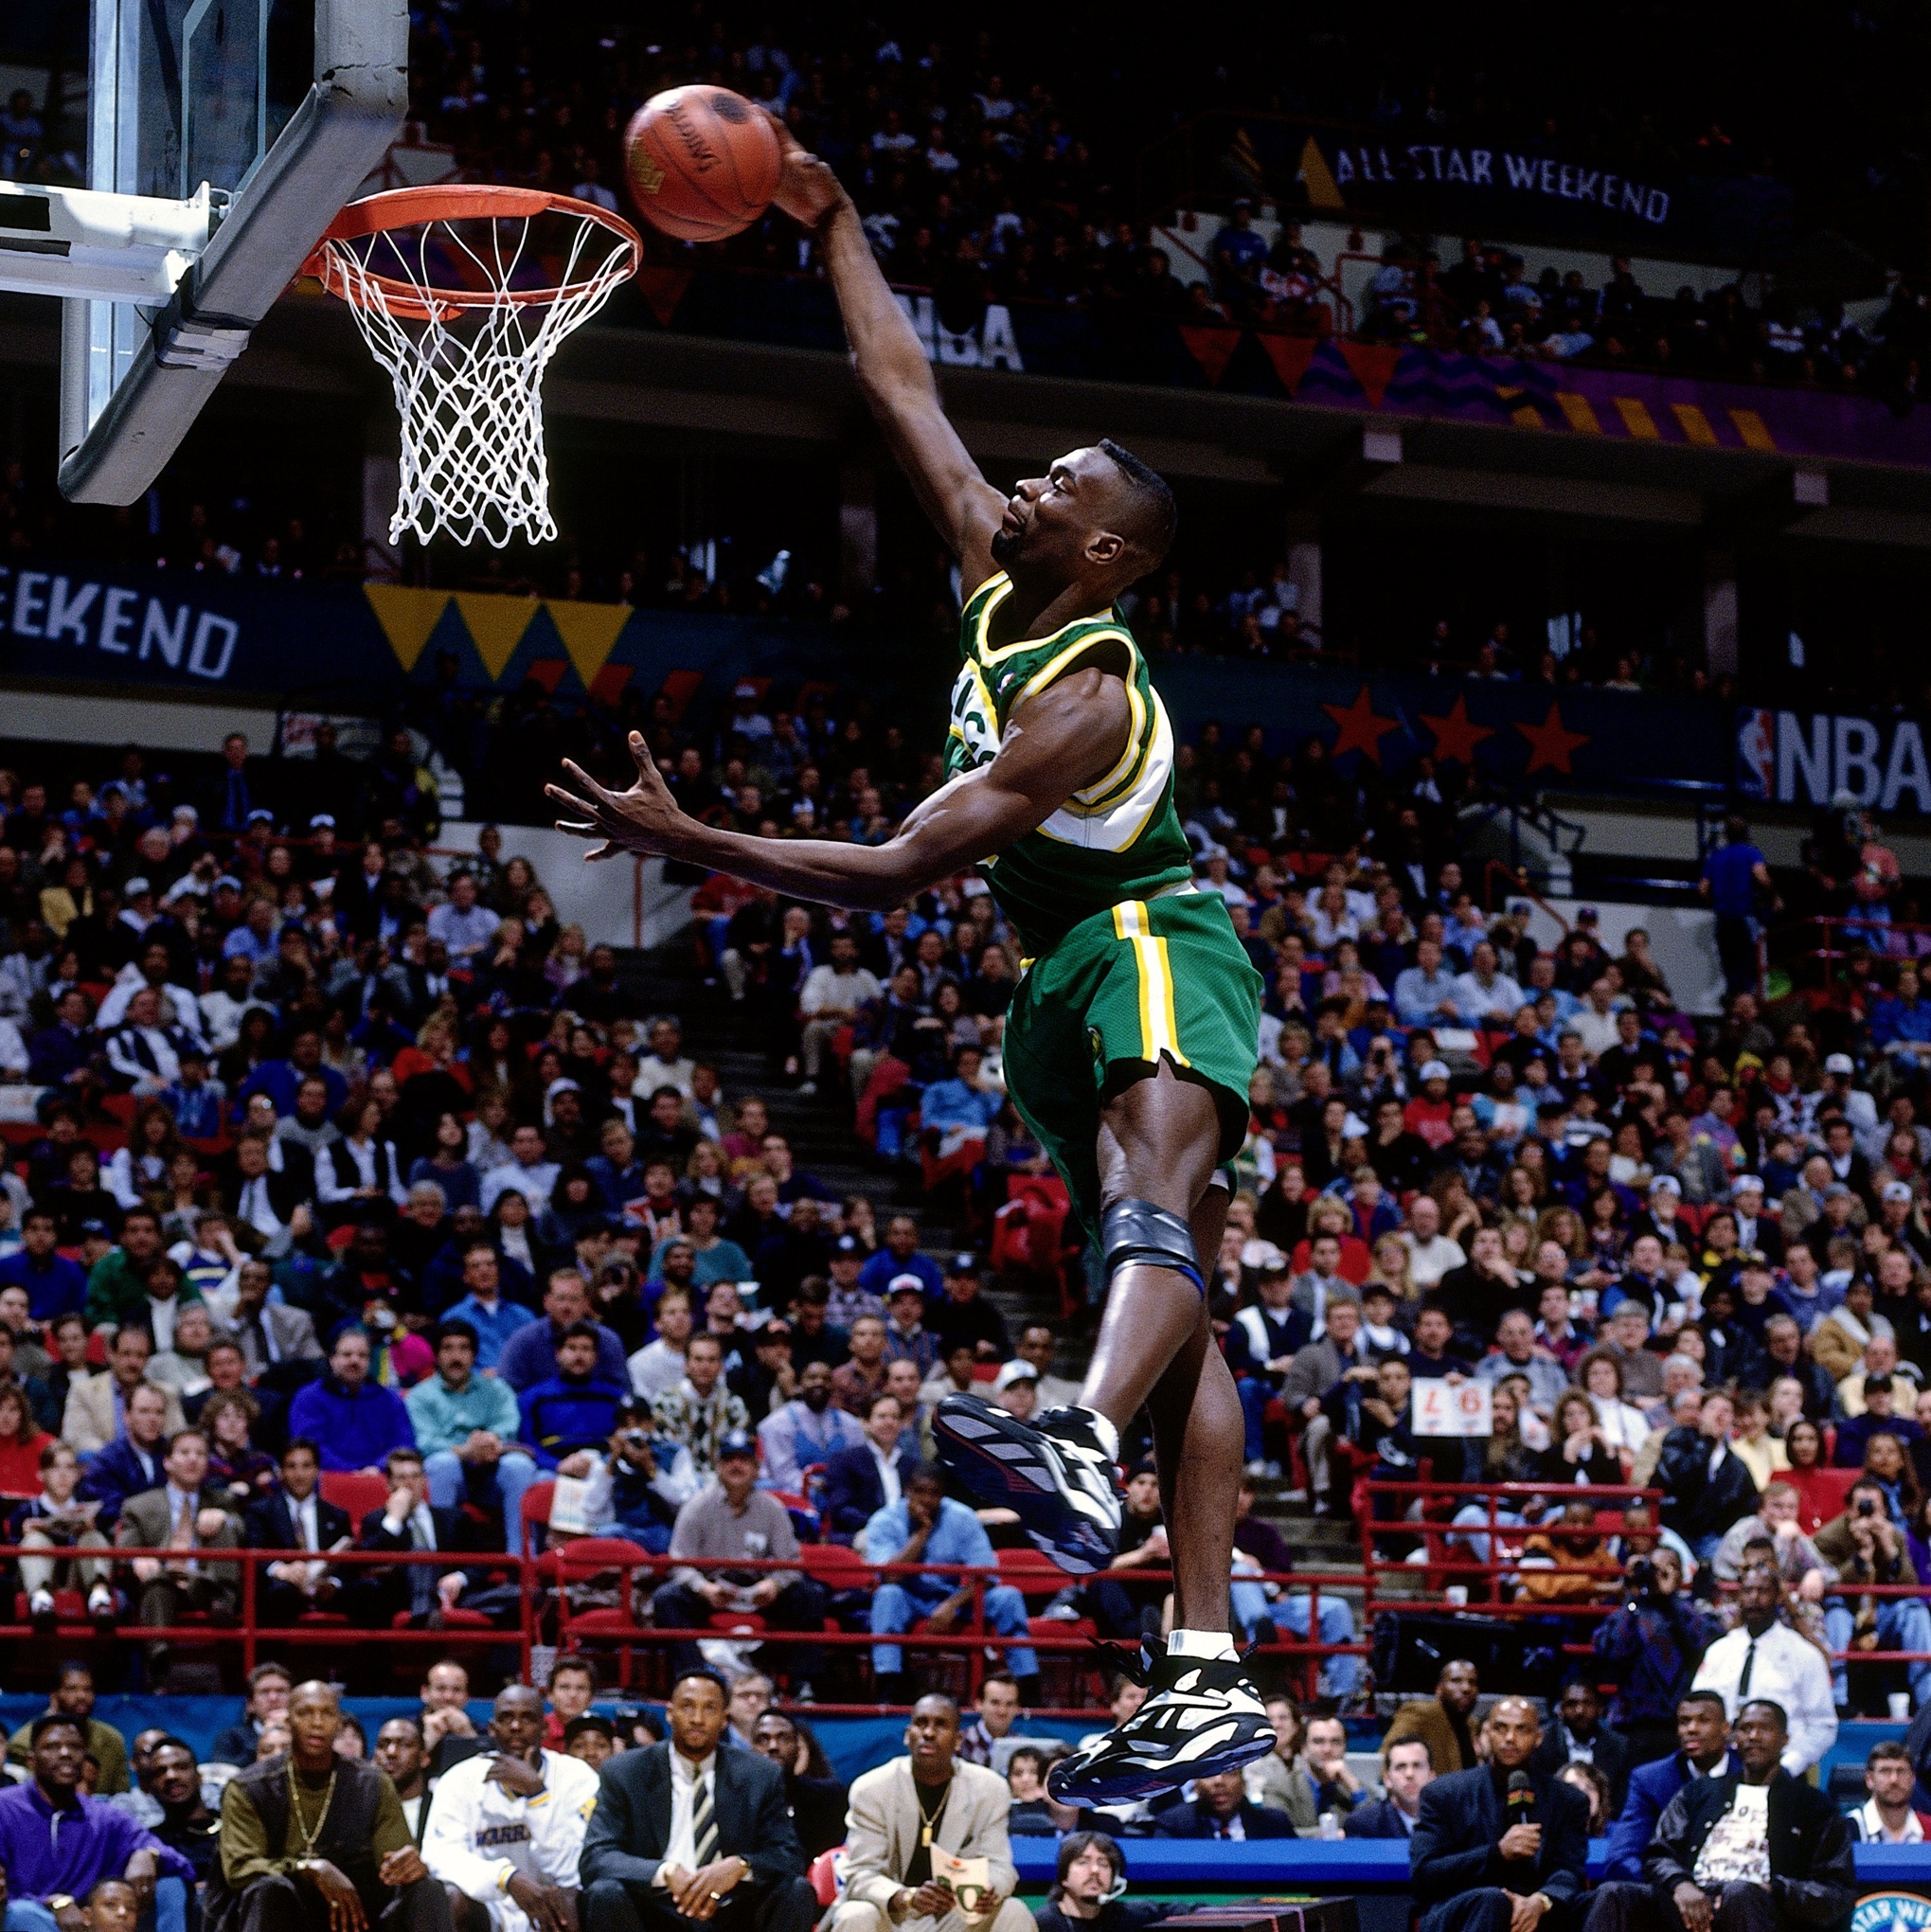 Reign of terror: Shawn Kemp, Gary Payton and the rise of the Seattle